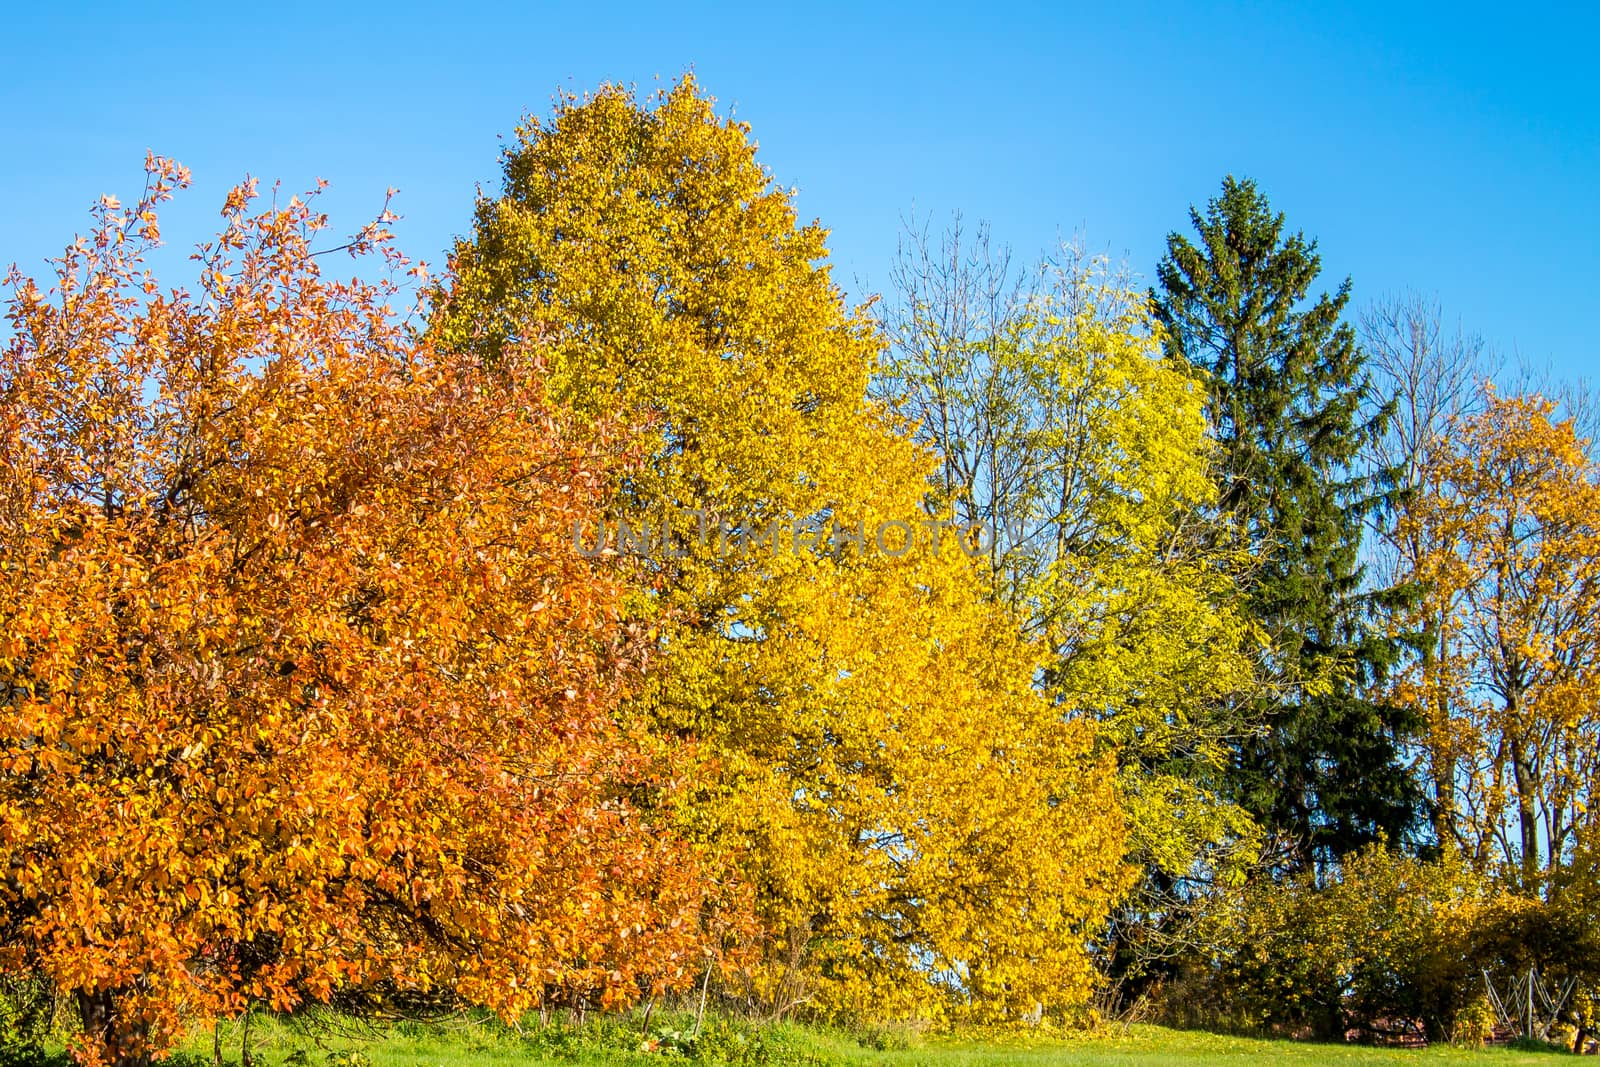 Bright colored autumn forest against the clear blue sky